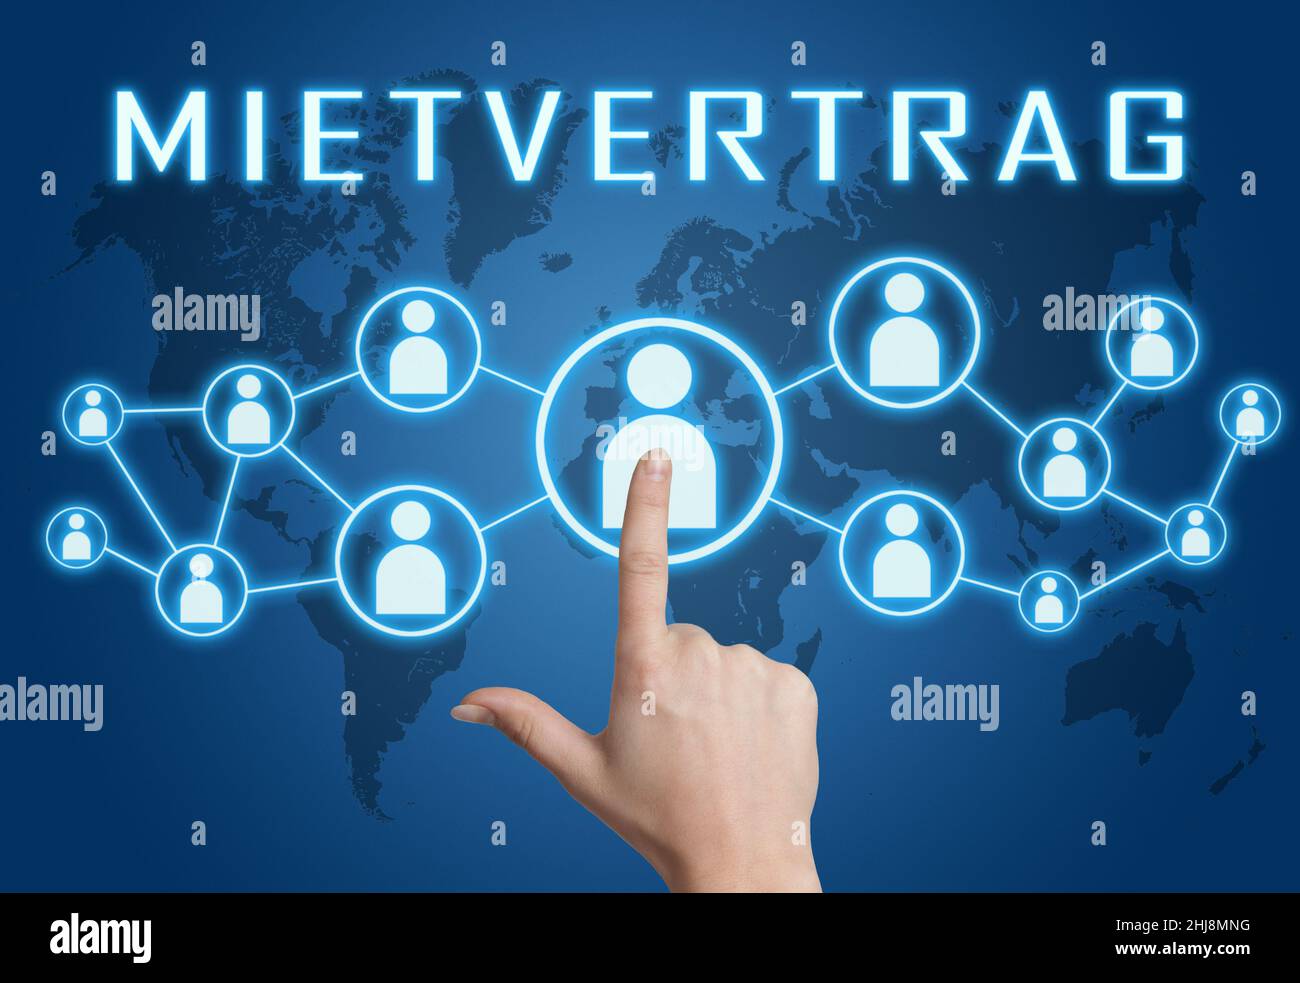 Mietvertrag - german word for rent contract or lease agreement - text concept with hand pressing social icons on blue world map background. Stock Photo